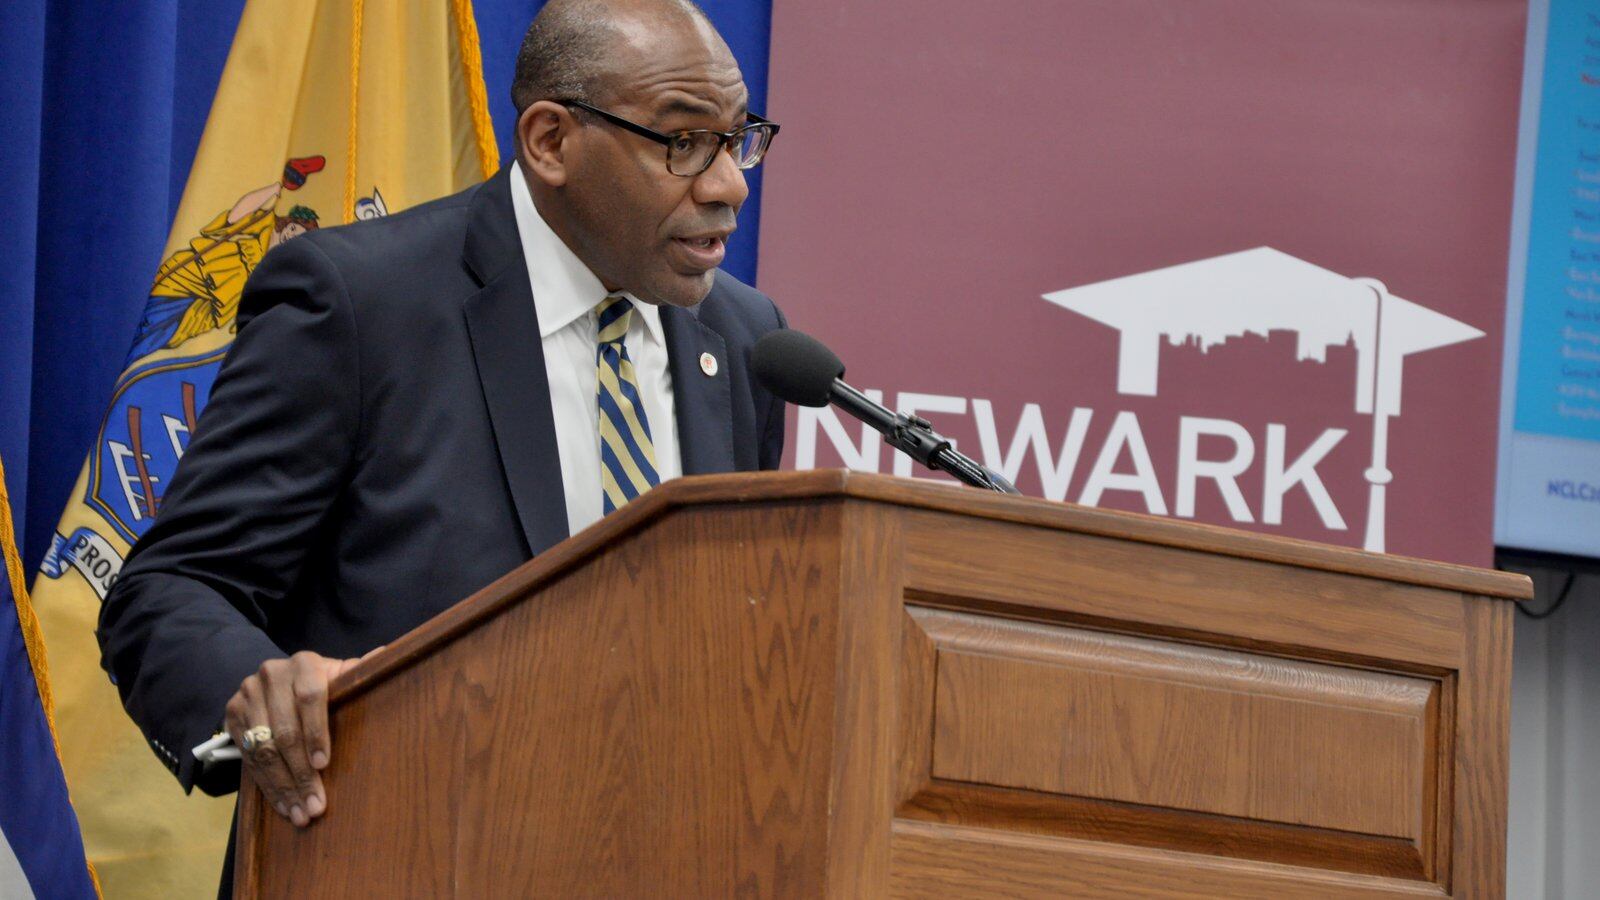 Reginald Lewis, executive director of the Newark City of Learning Collaborative, announces the launch of the campaign on Thursday at City Hall.